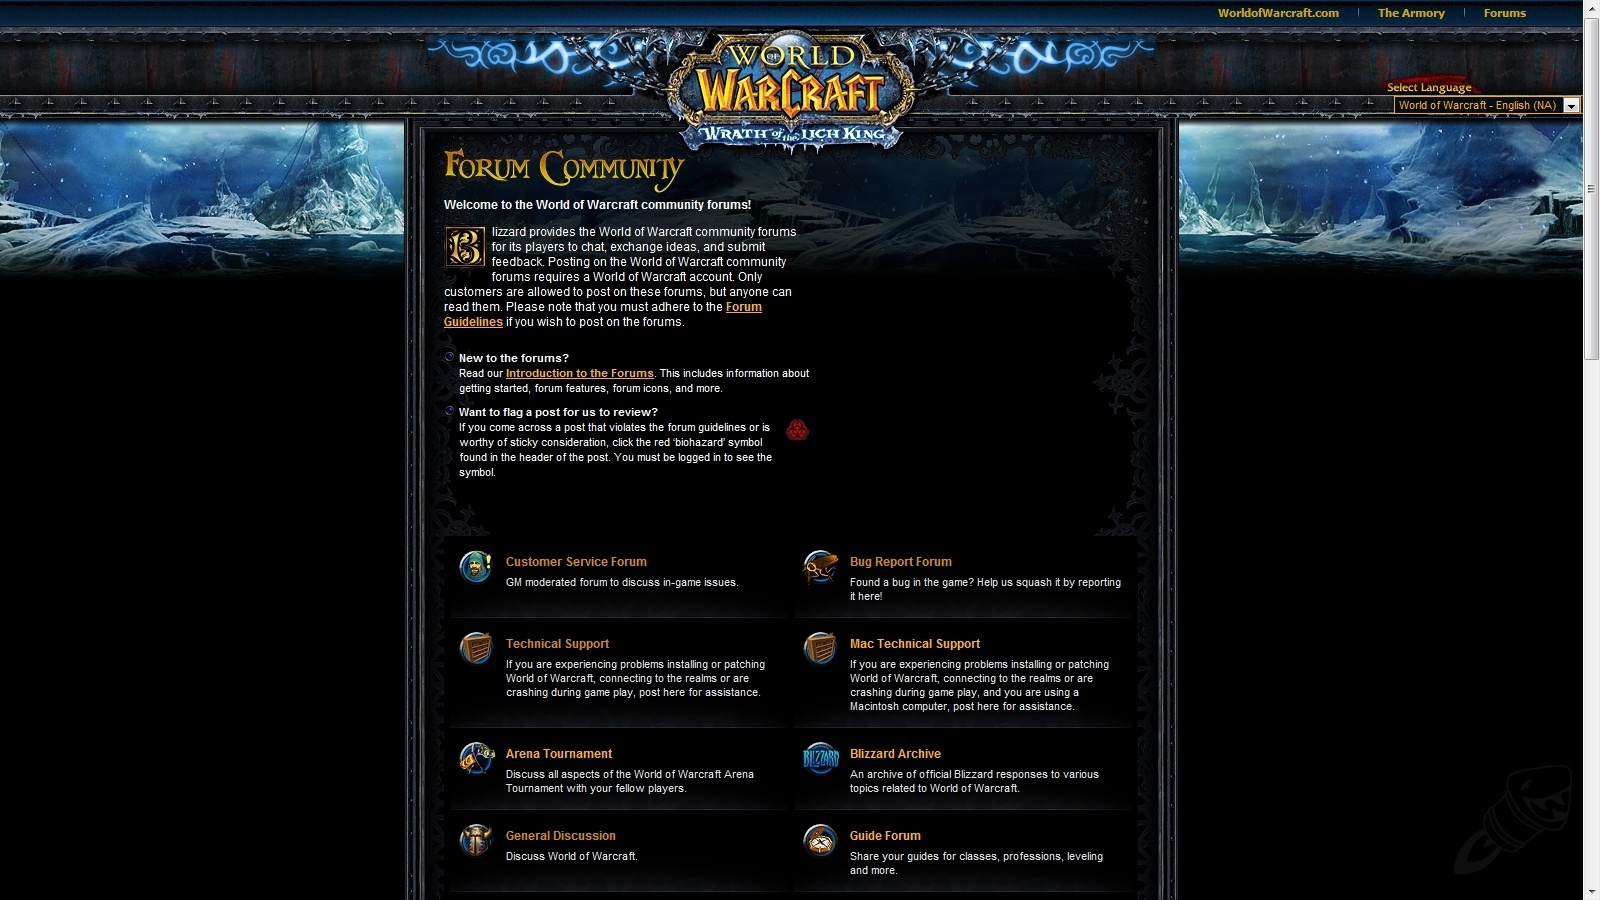 That name is Unavailable - General Discussion - World of Warcraft Forums